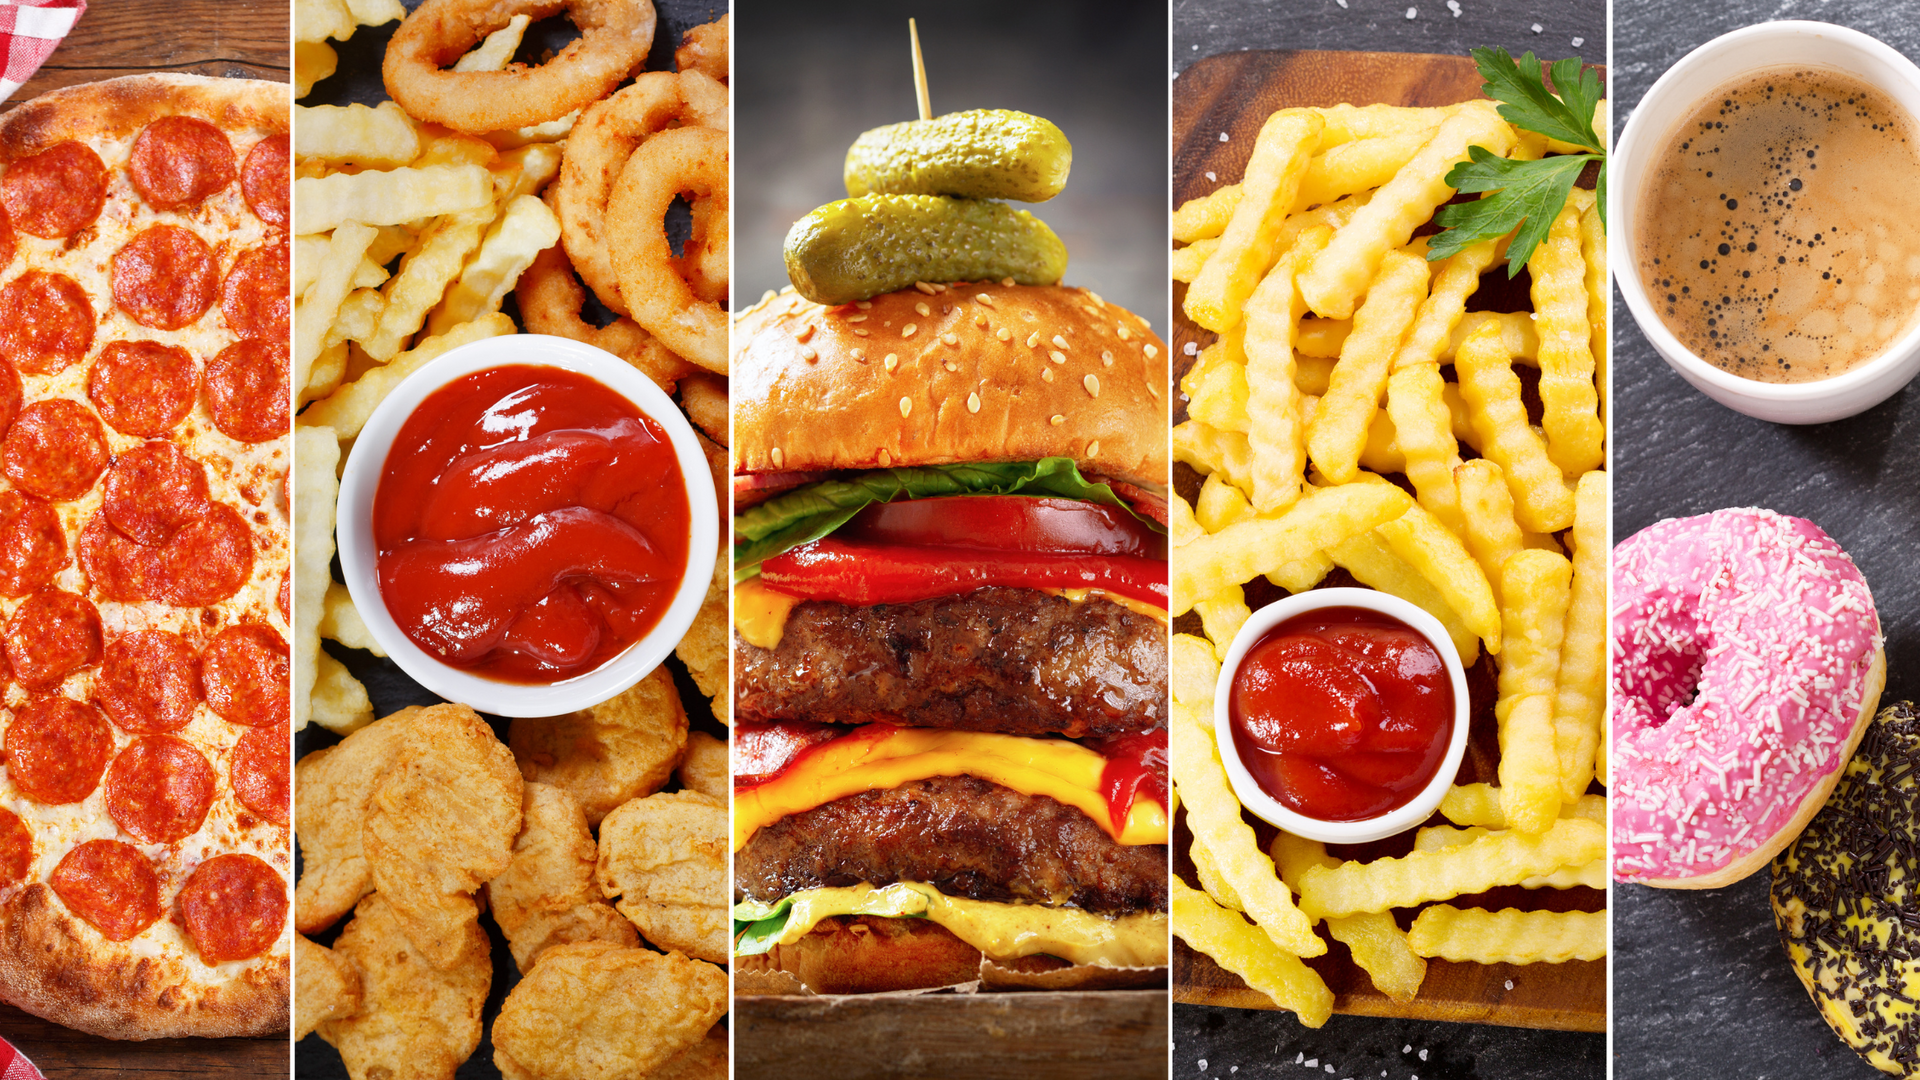 Healthier Picks at Popular Fast Food Chains